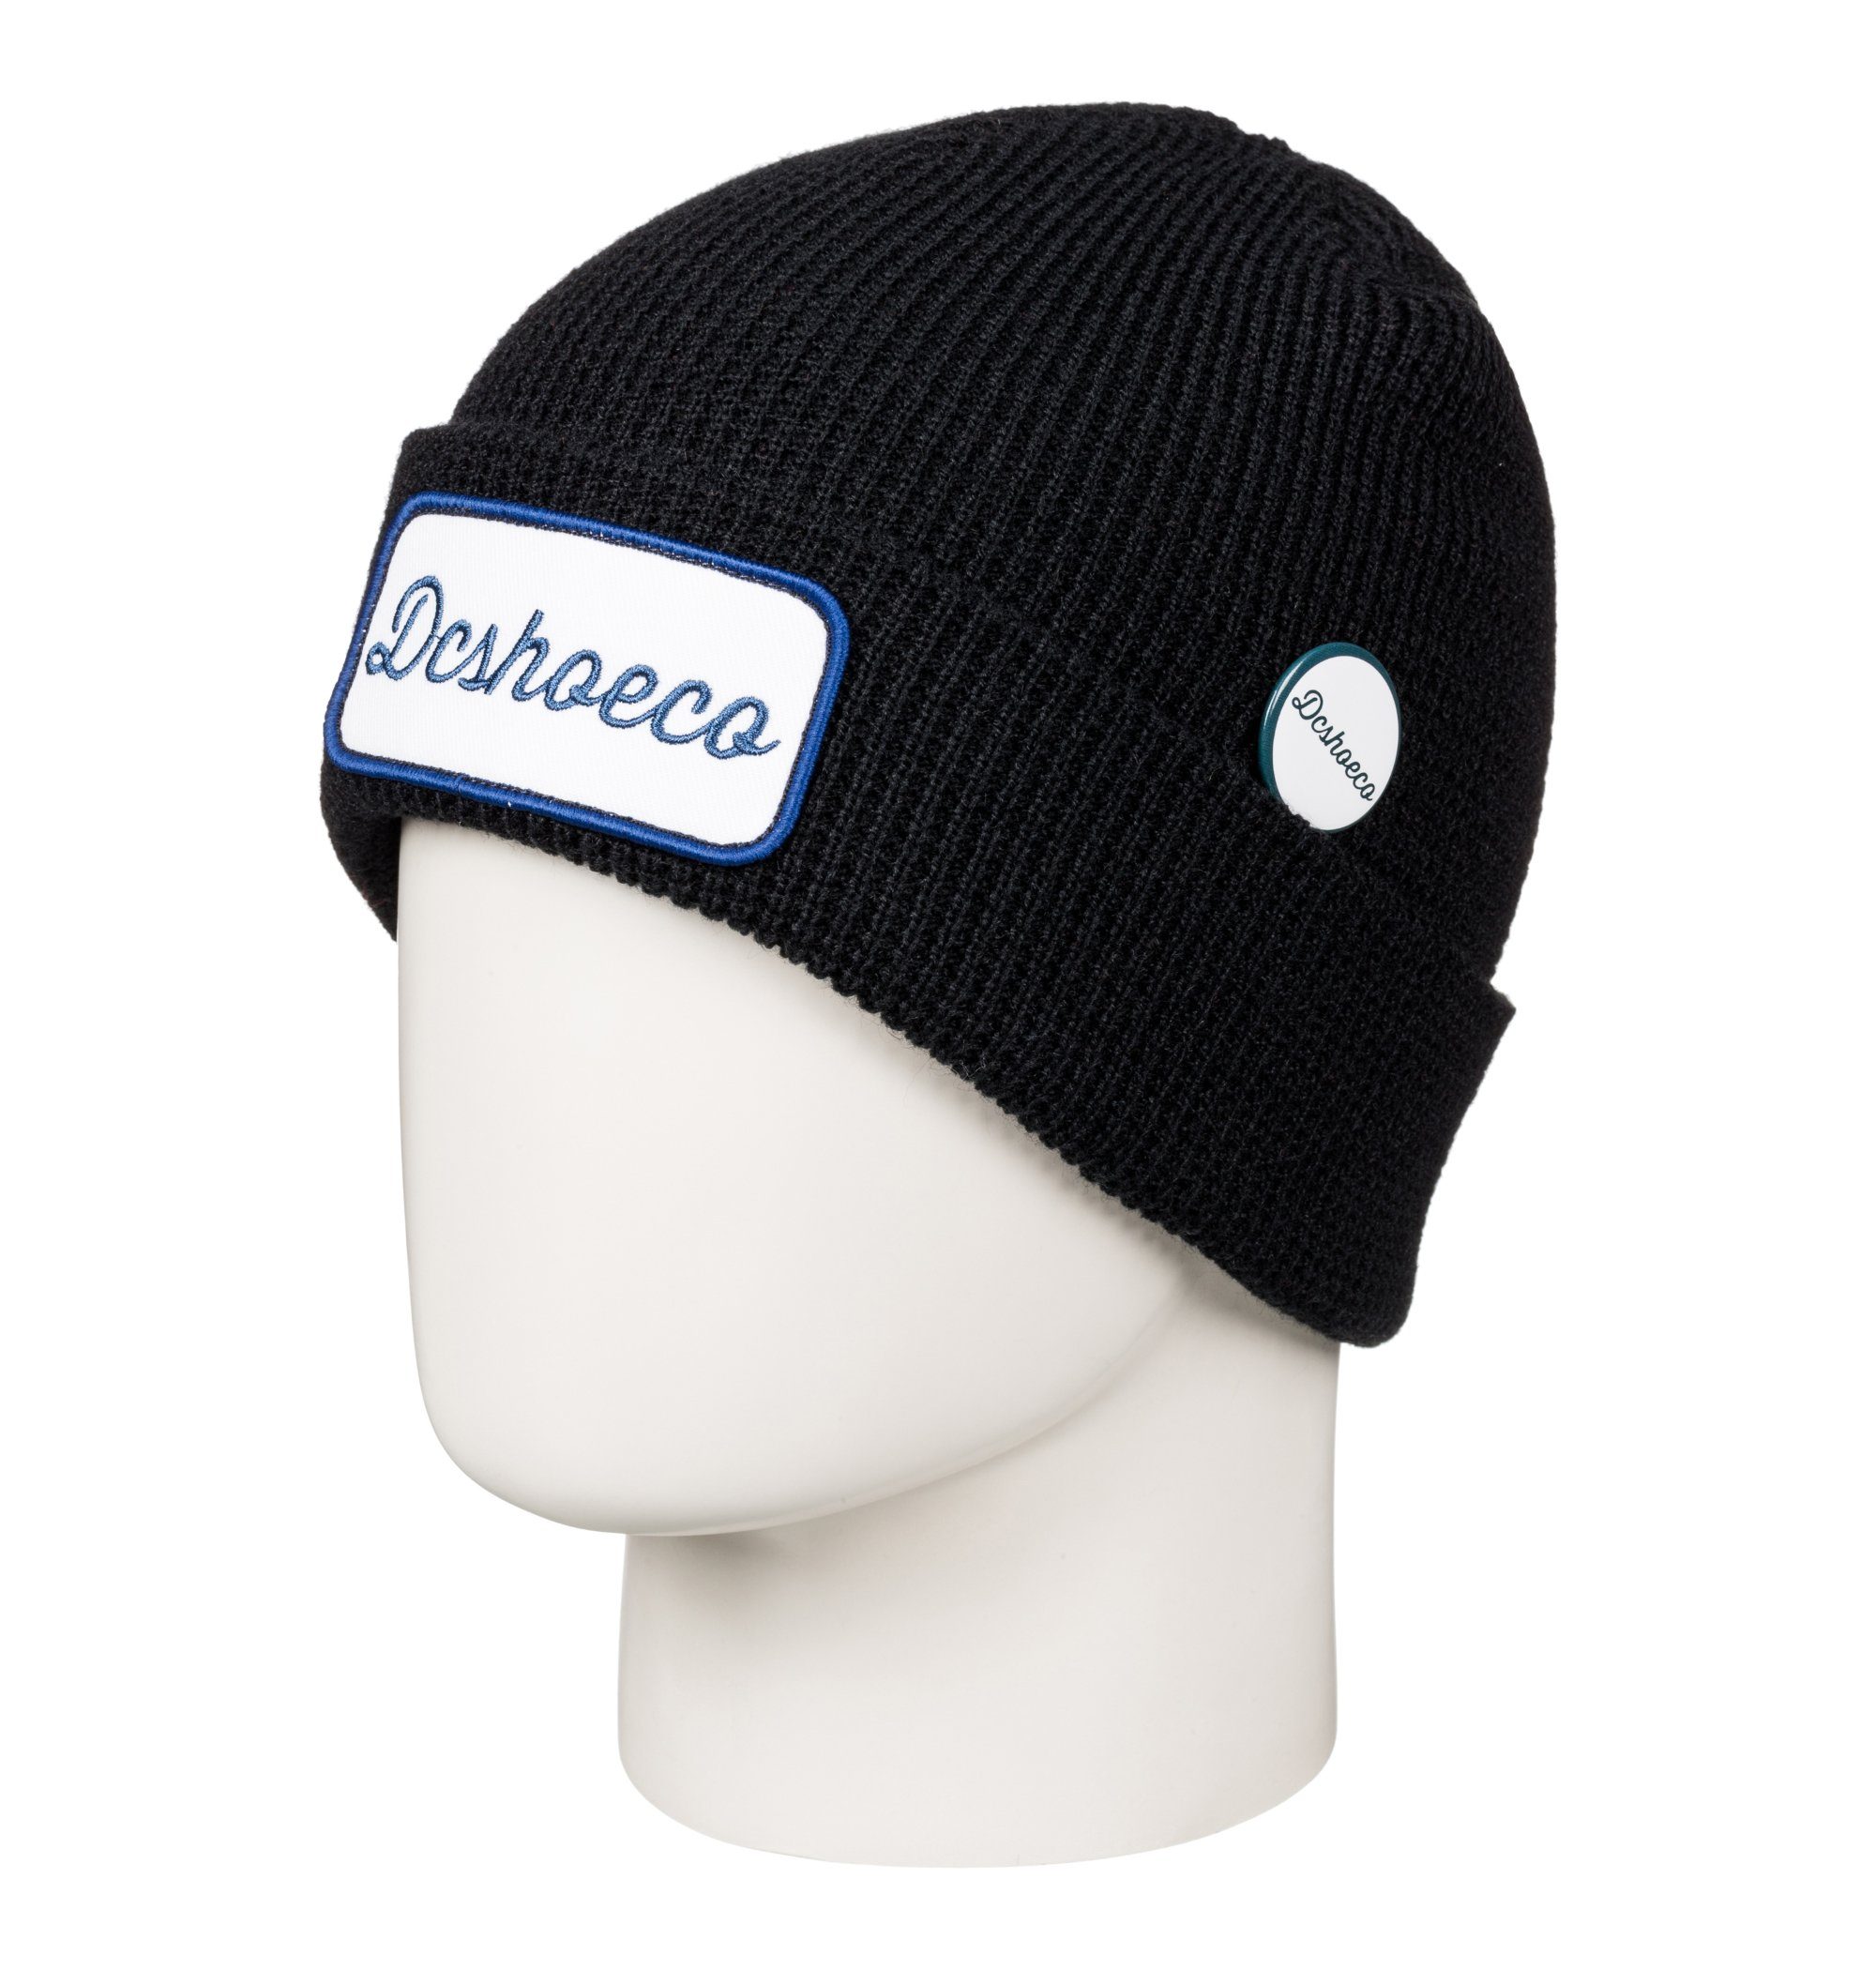 Otto - Dc Shoes NU 15% KORTING: DC Shoes Beanie met zoom Neesh